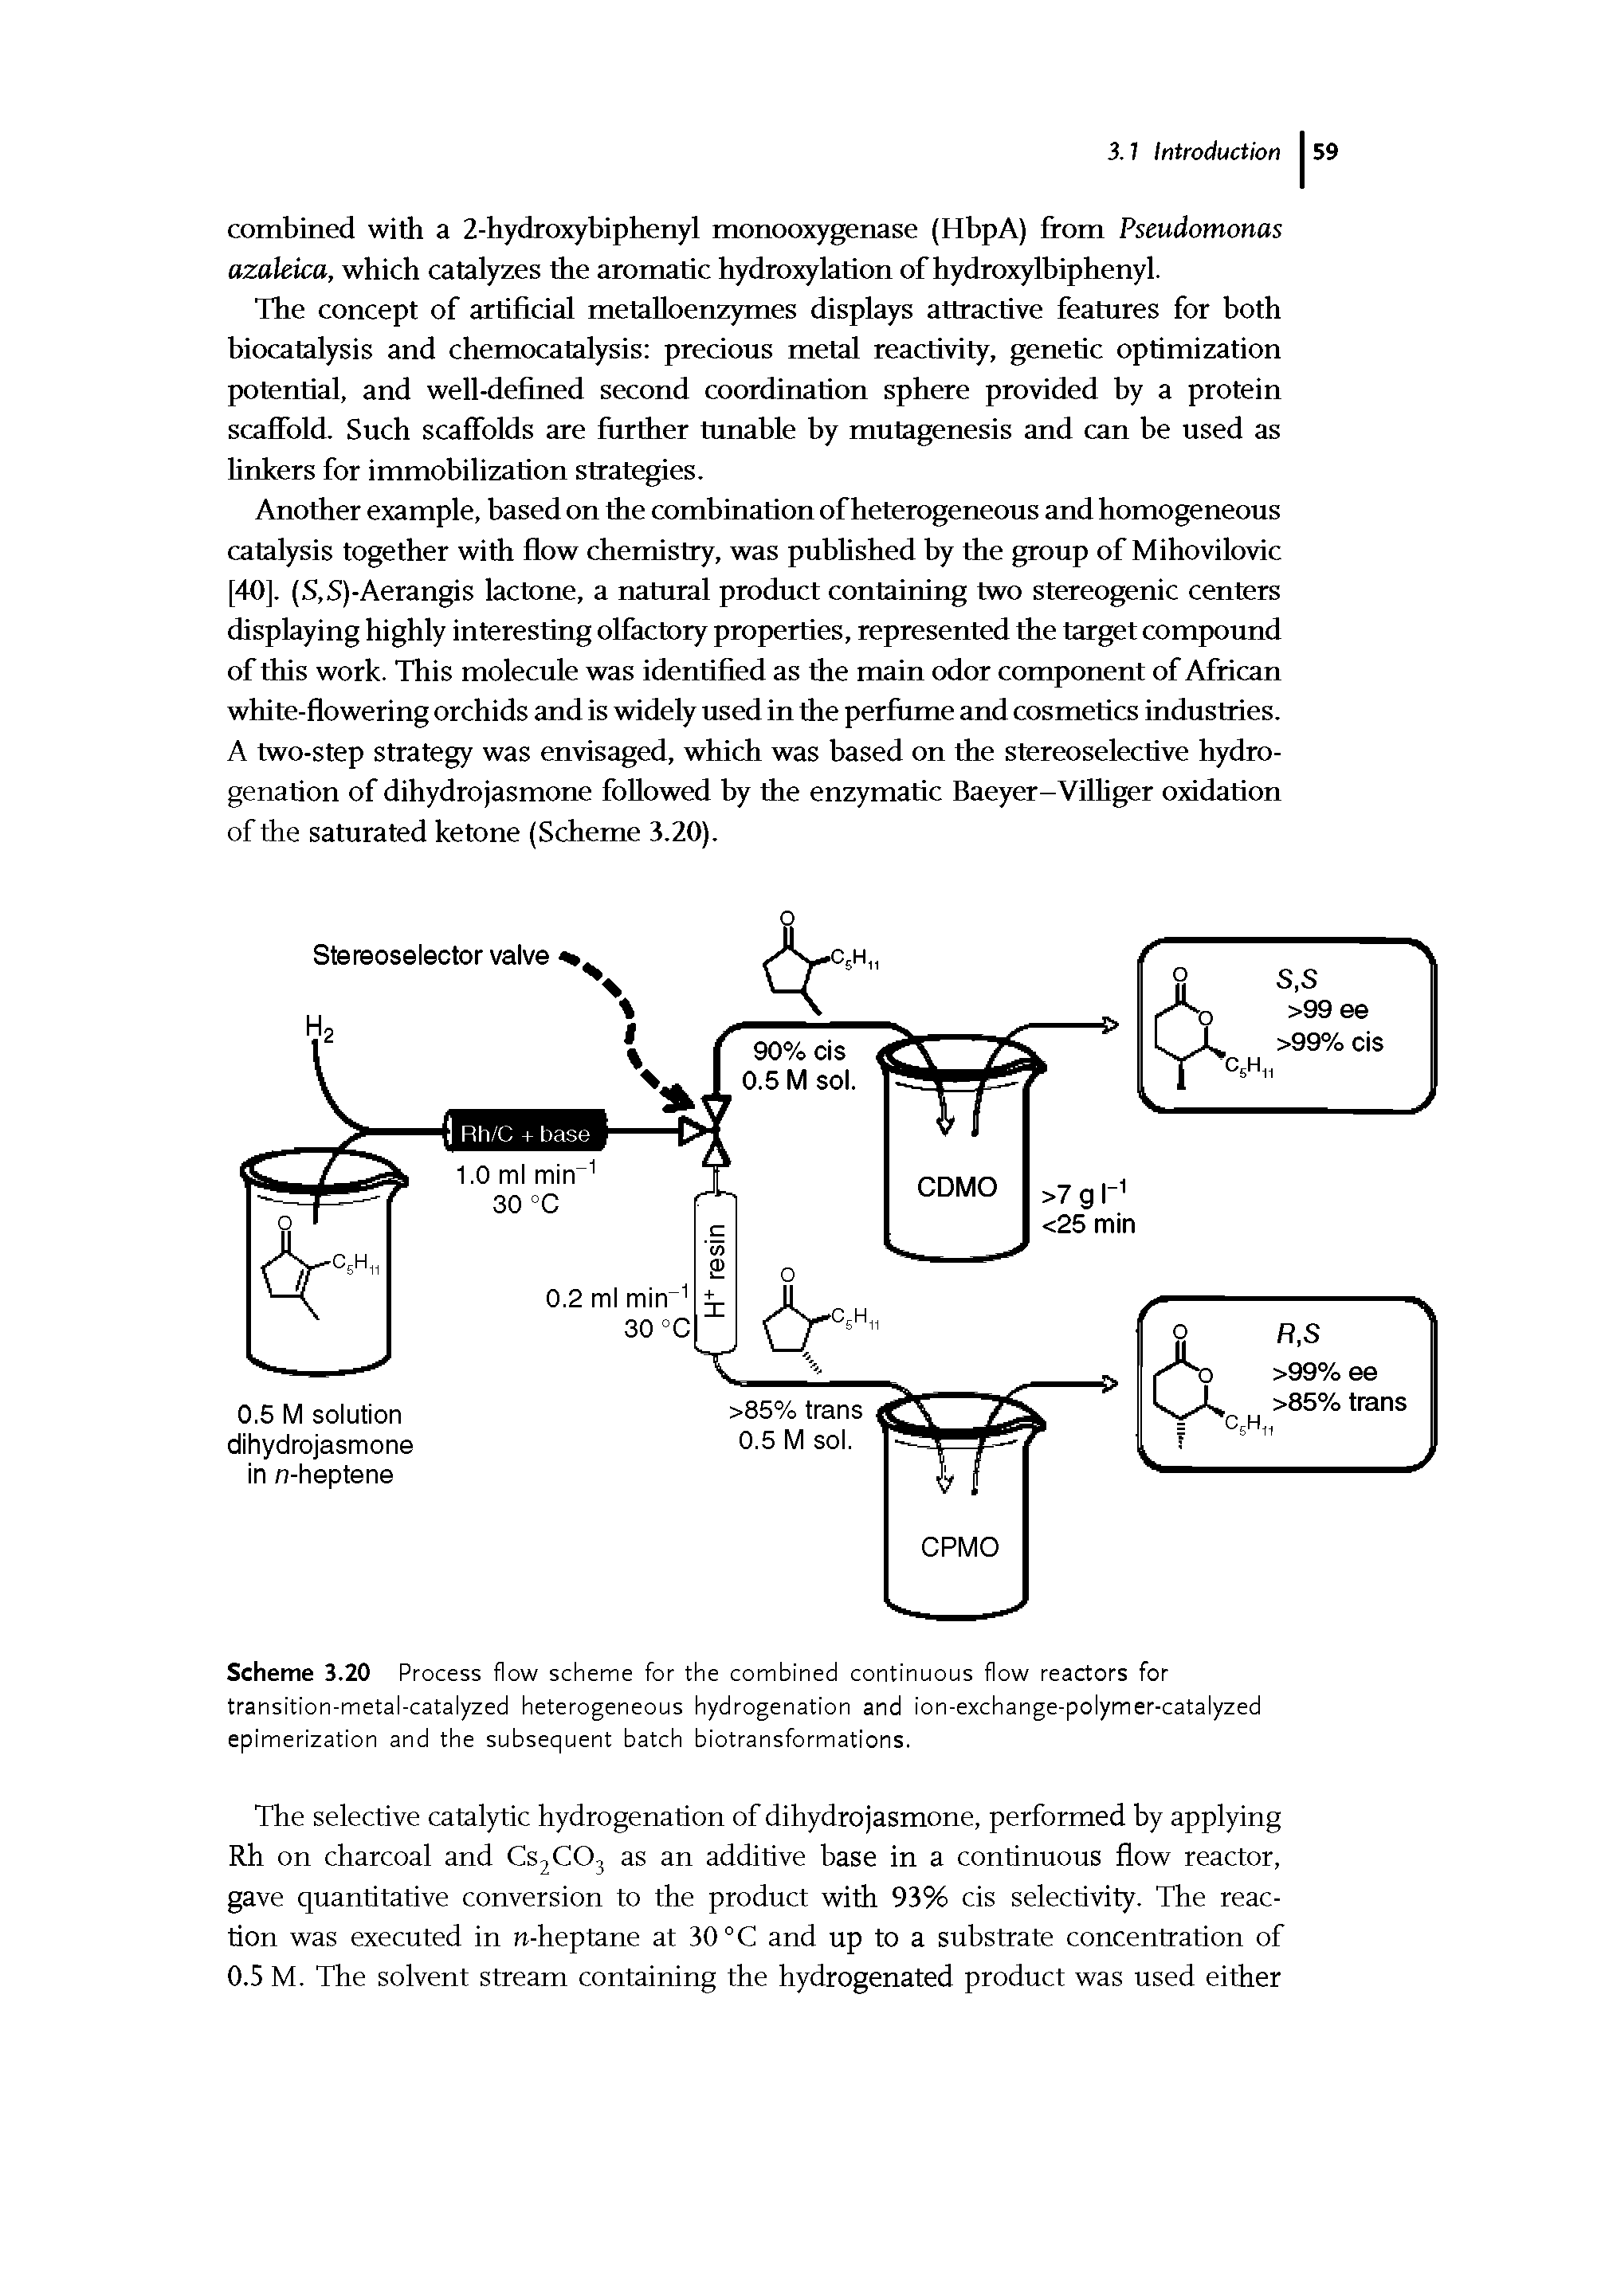 Scheme 3.20 Process flow scheme for the combined continuous flow reactors for transition-metal-catalyzed heterogeneous hydrogenation and ion-exchange-polymer-catalyzed epimerization and the subsequent batch biotransformations.